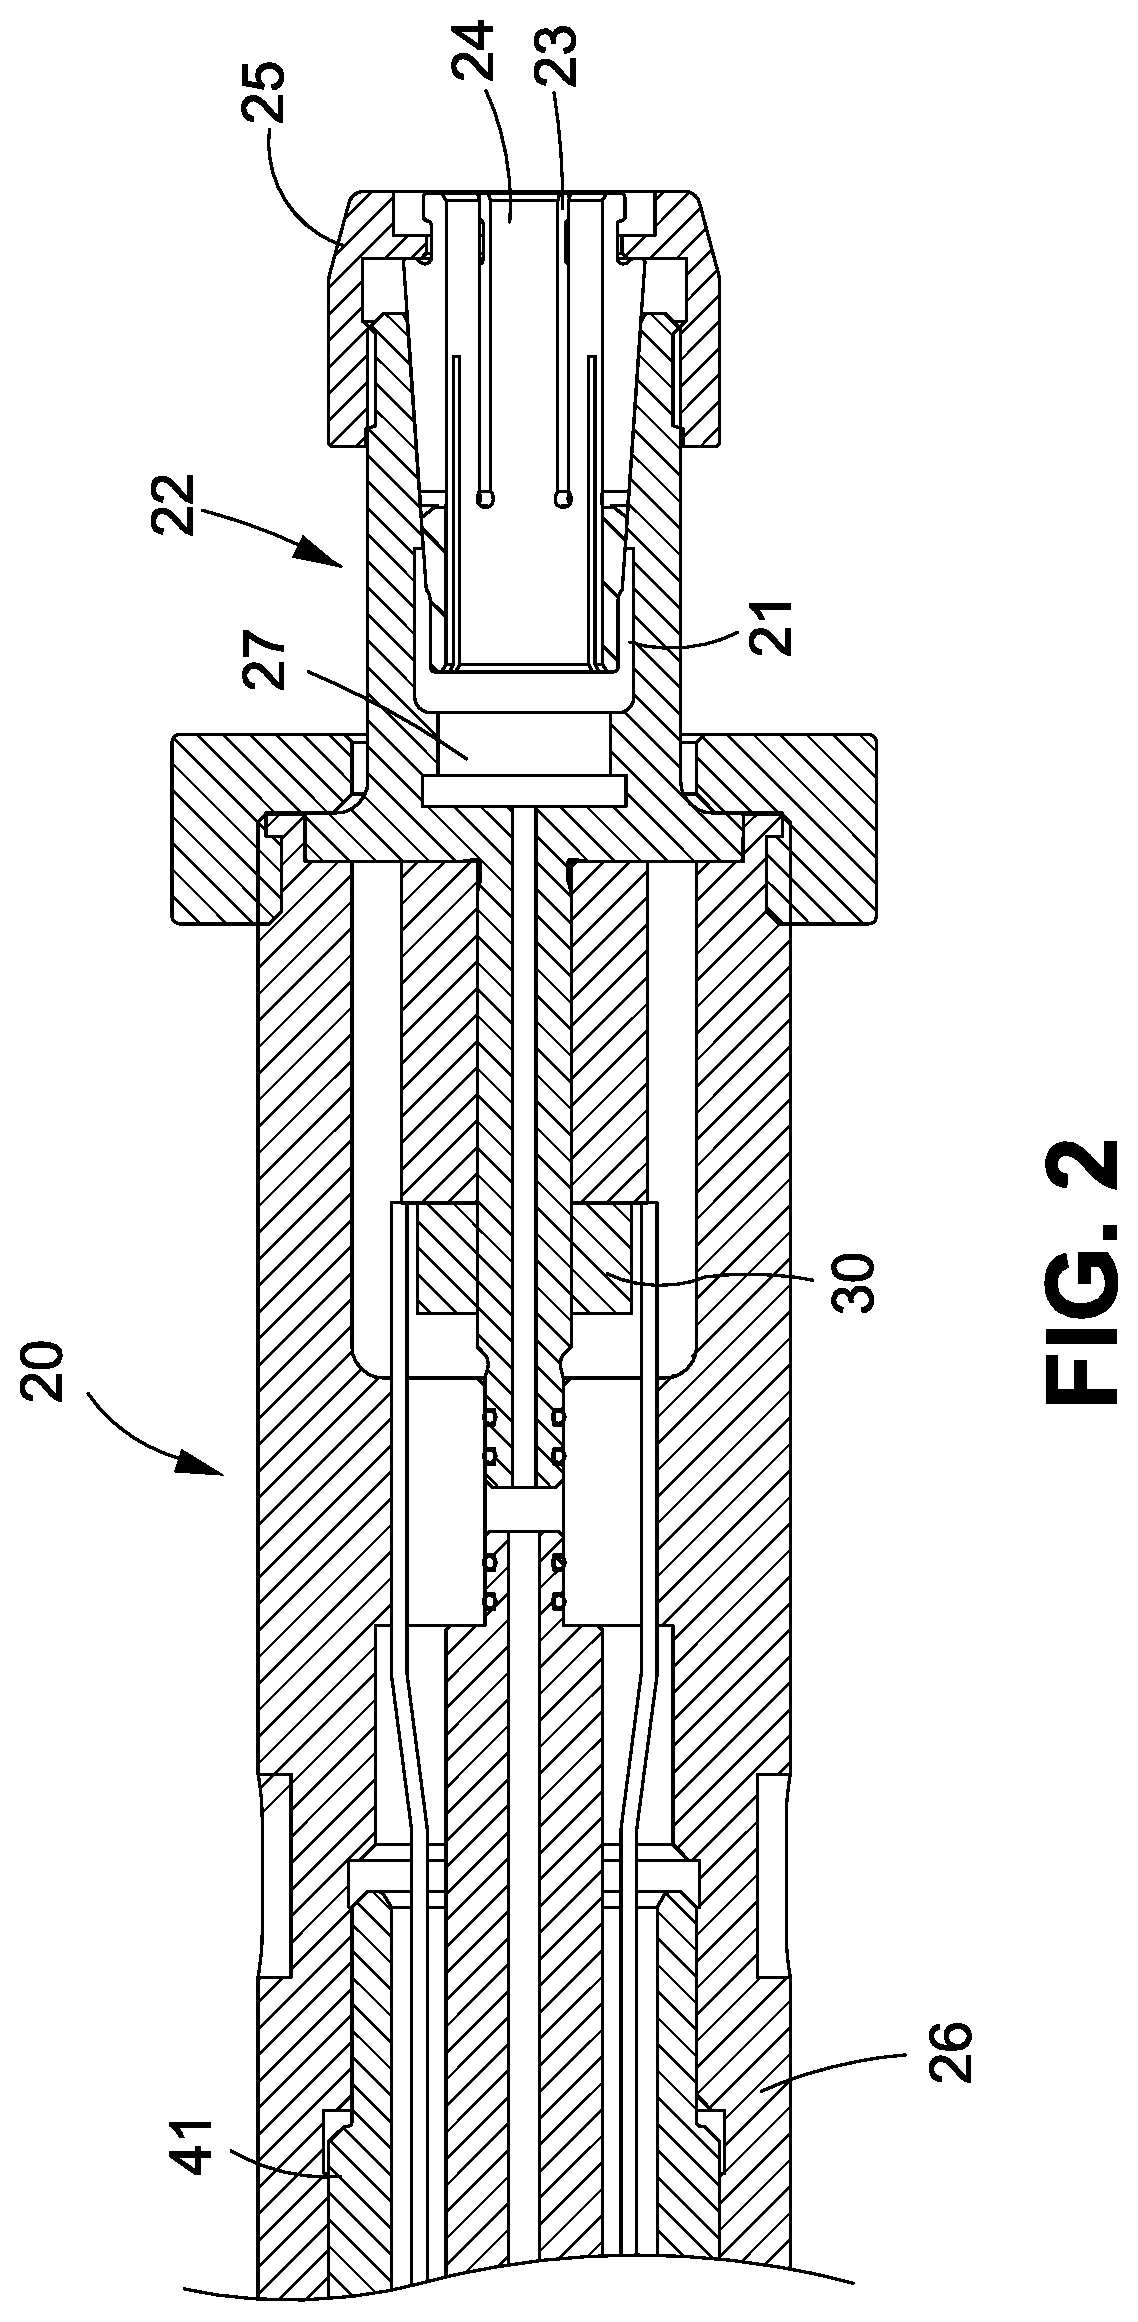 Tool Holder Having An Arrangement For Delivering Coolant And Transmitting Electric Power